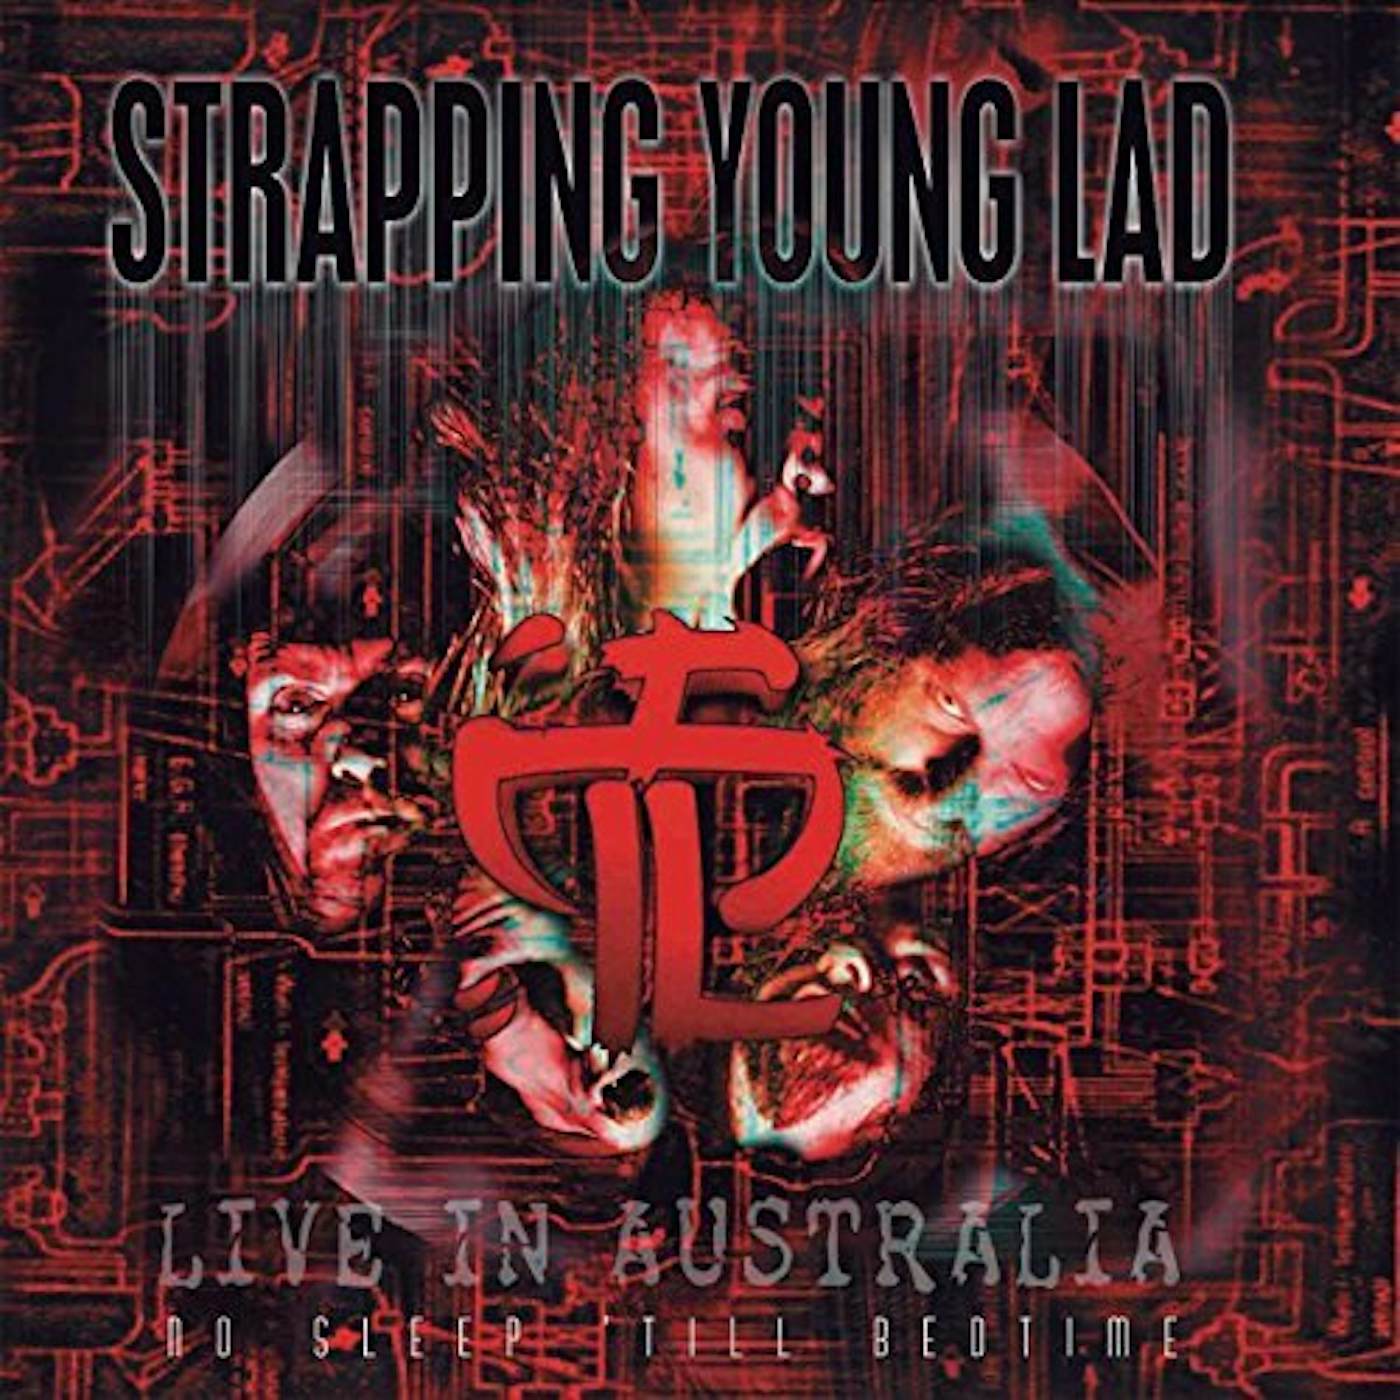 Strapping Young Lad NO SLEEP TIL BEDTIME: LIVE IN AUSTRALIA Vinyl Record - UK Release